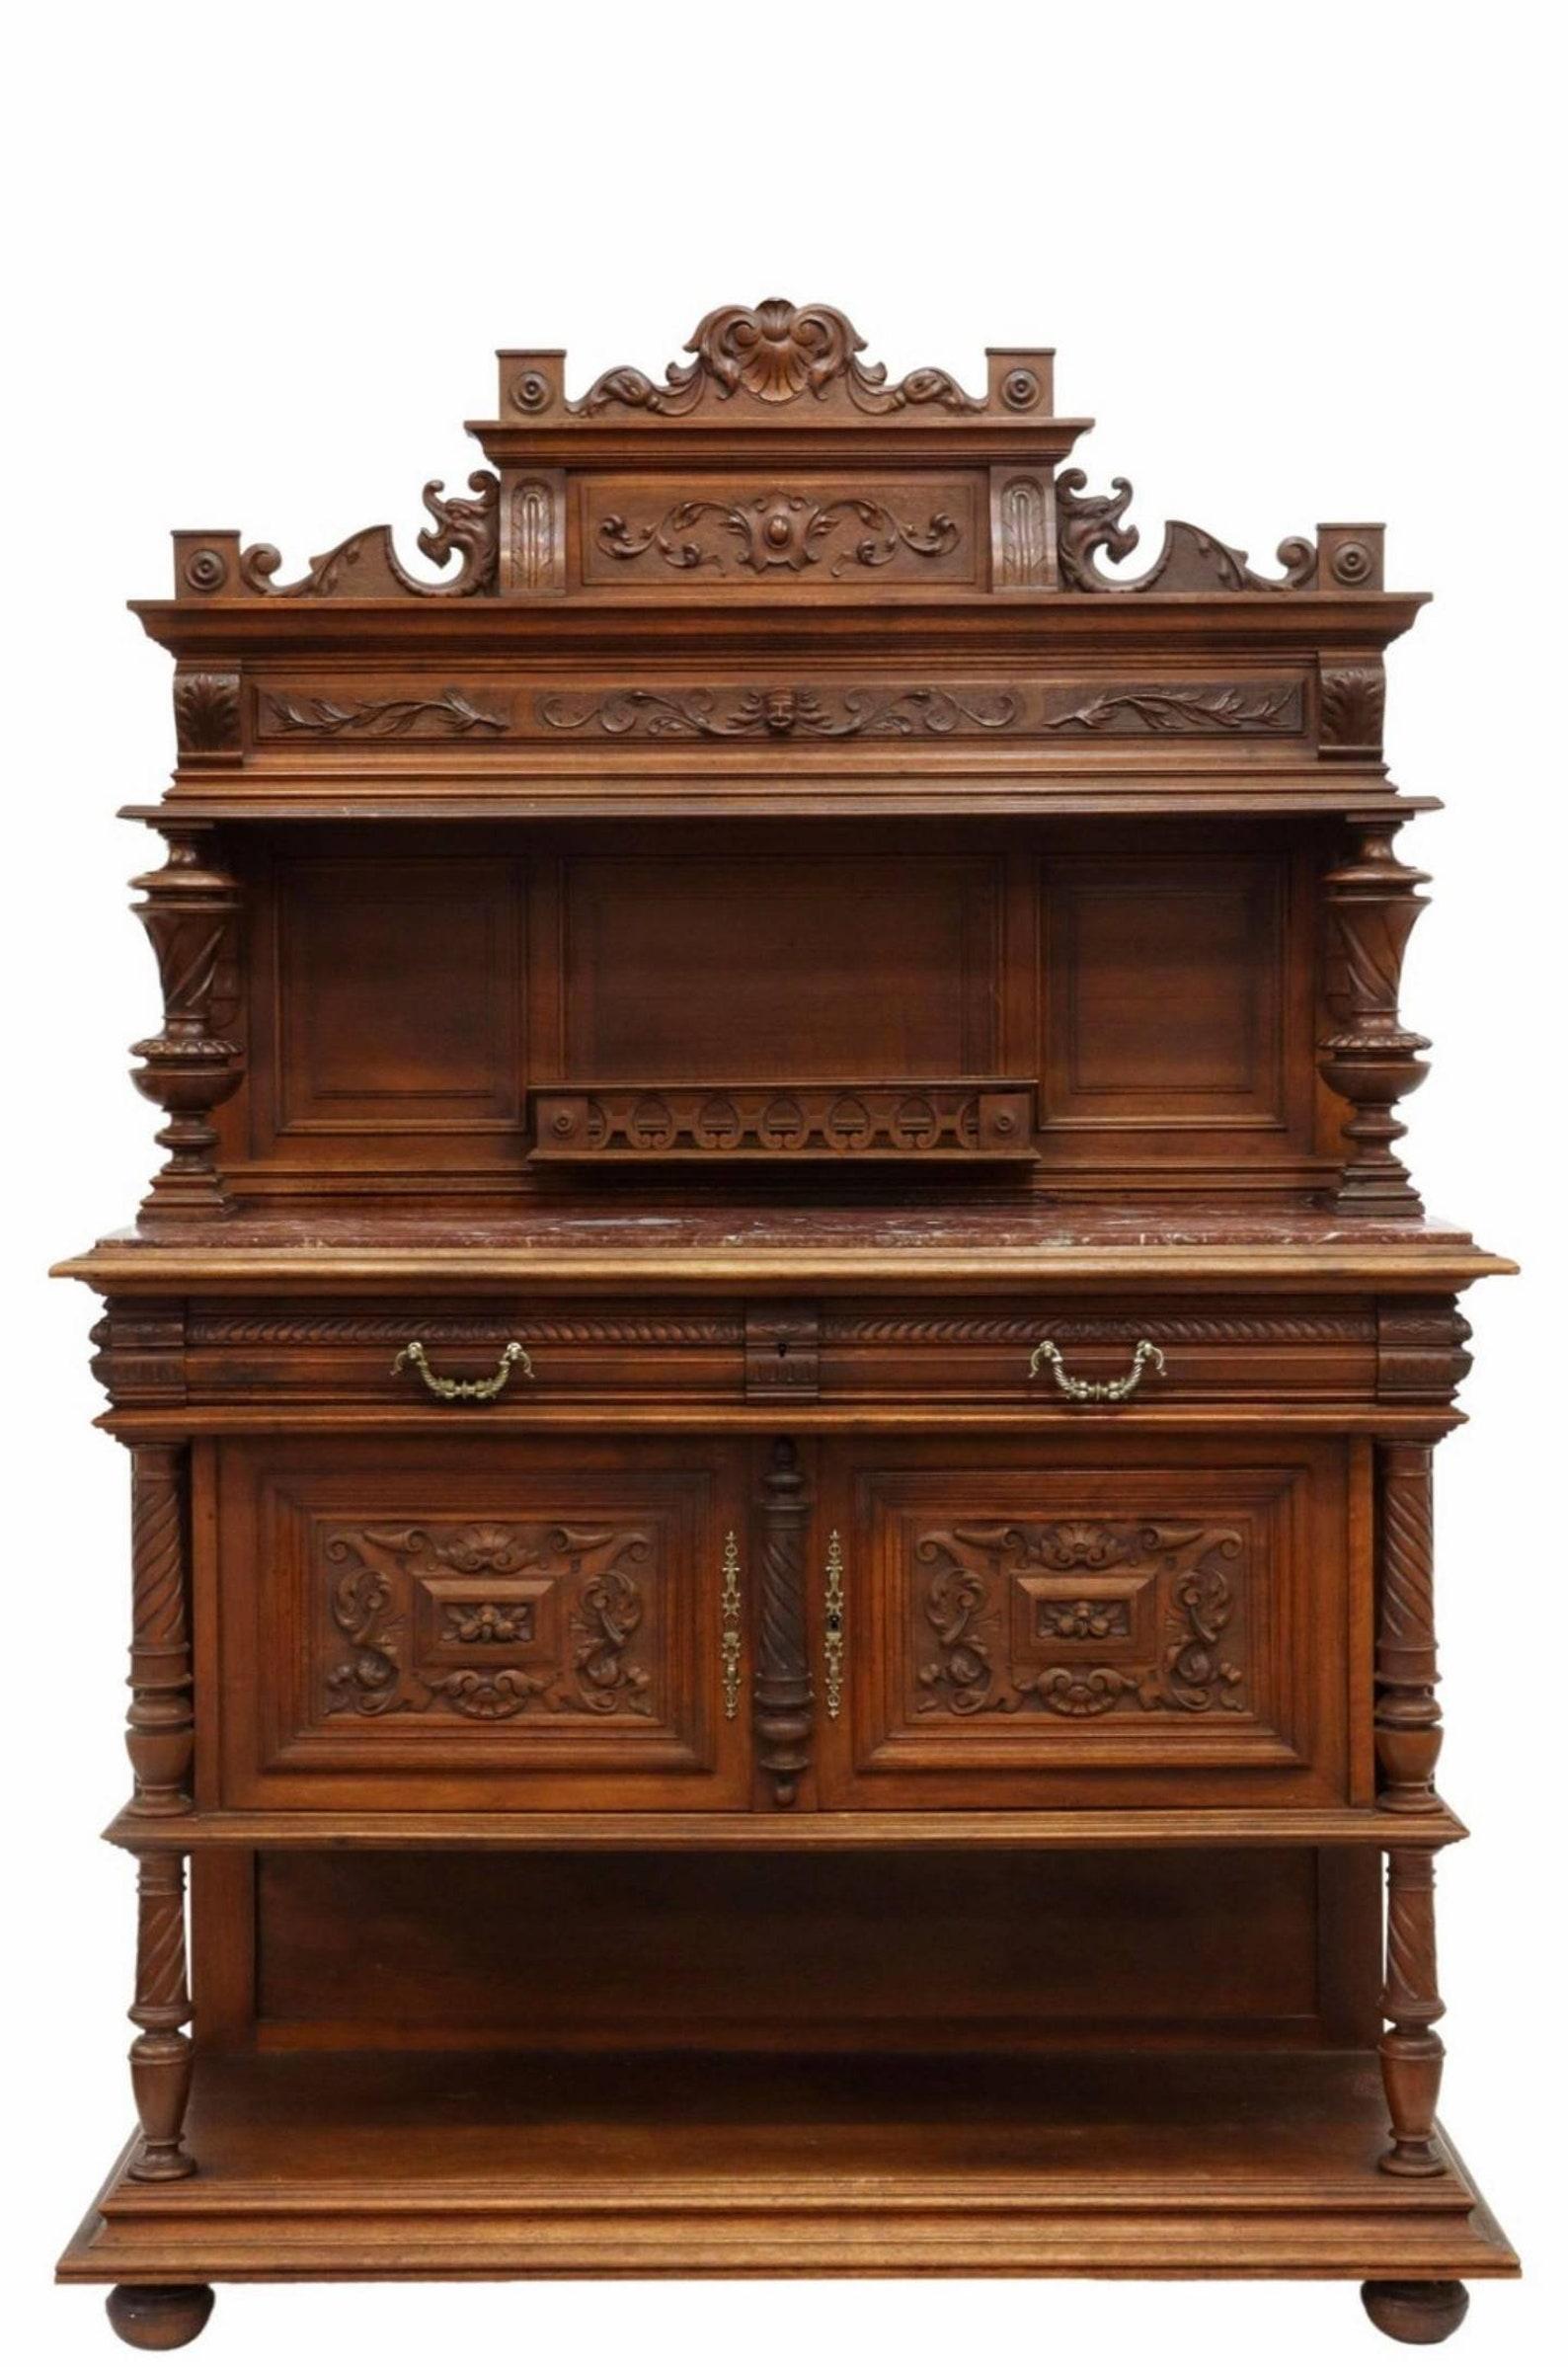 A most impressive antique, circa 1880, French carved walnut marble-top top buffet- sideboard server with nicely aged patina. 

Born in France during the late 19th century Renaissance Revival, hand-crafted of warm, rich solid walnut, exceptionally